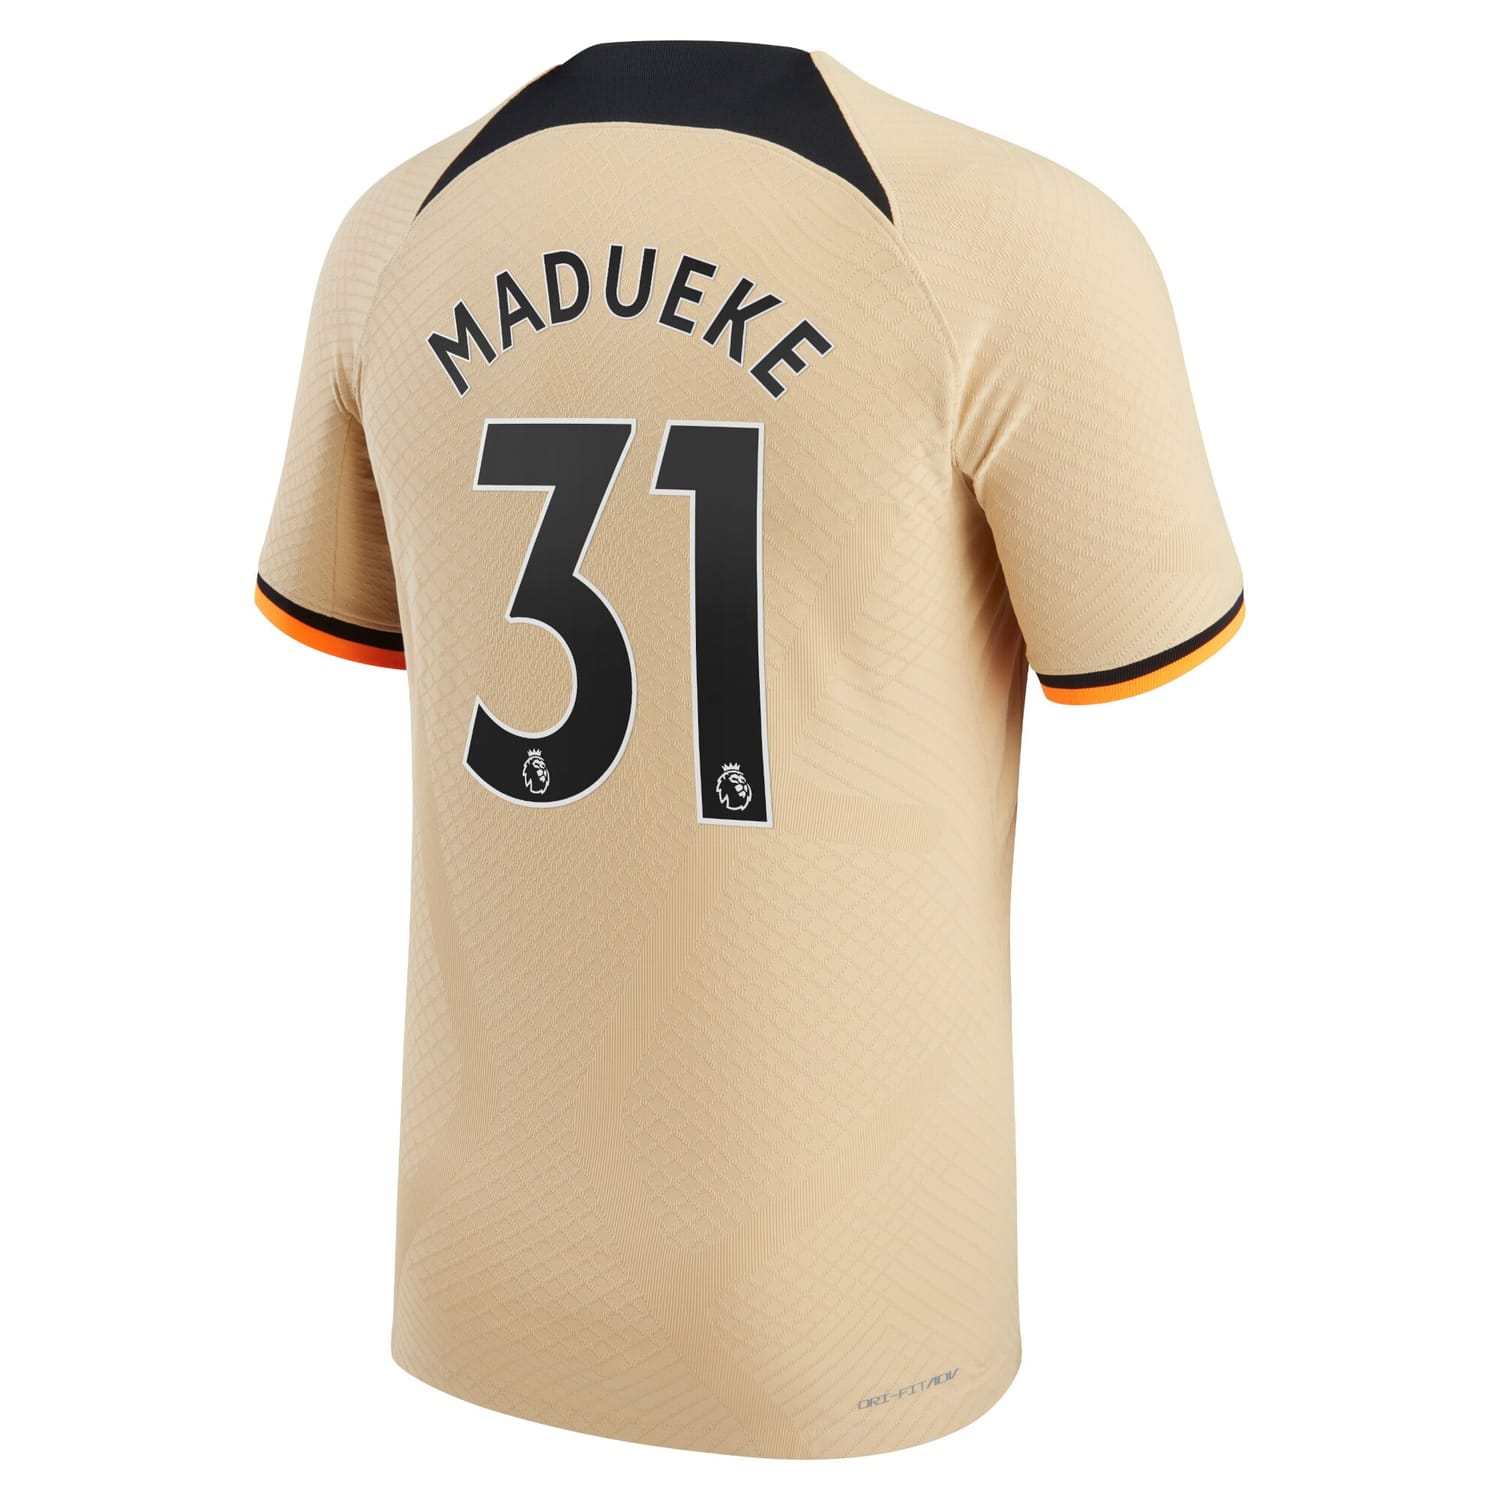 Premier League Chelsea Third Authentic Jersey Shirt 2022-23 player Noni Madueke 31 printing for Men